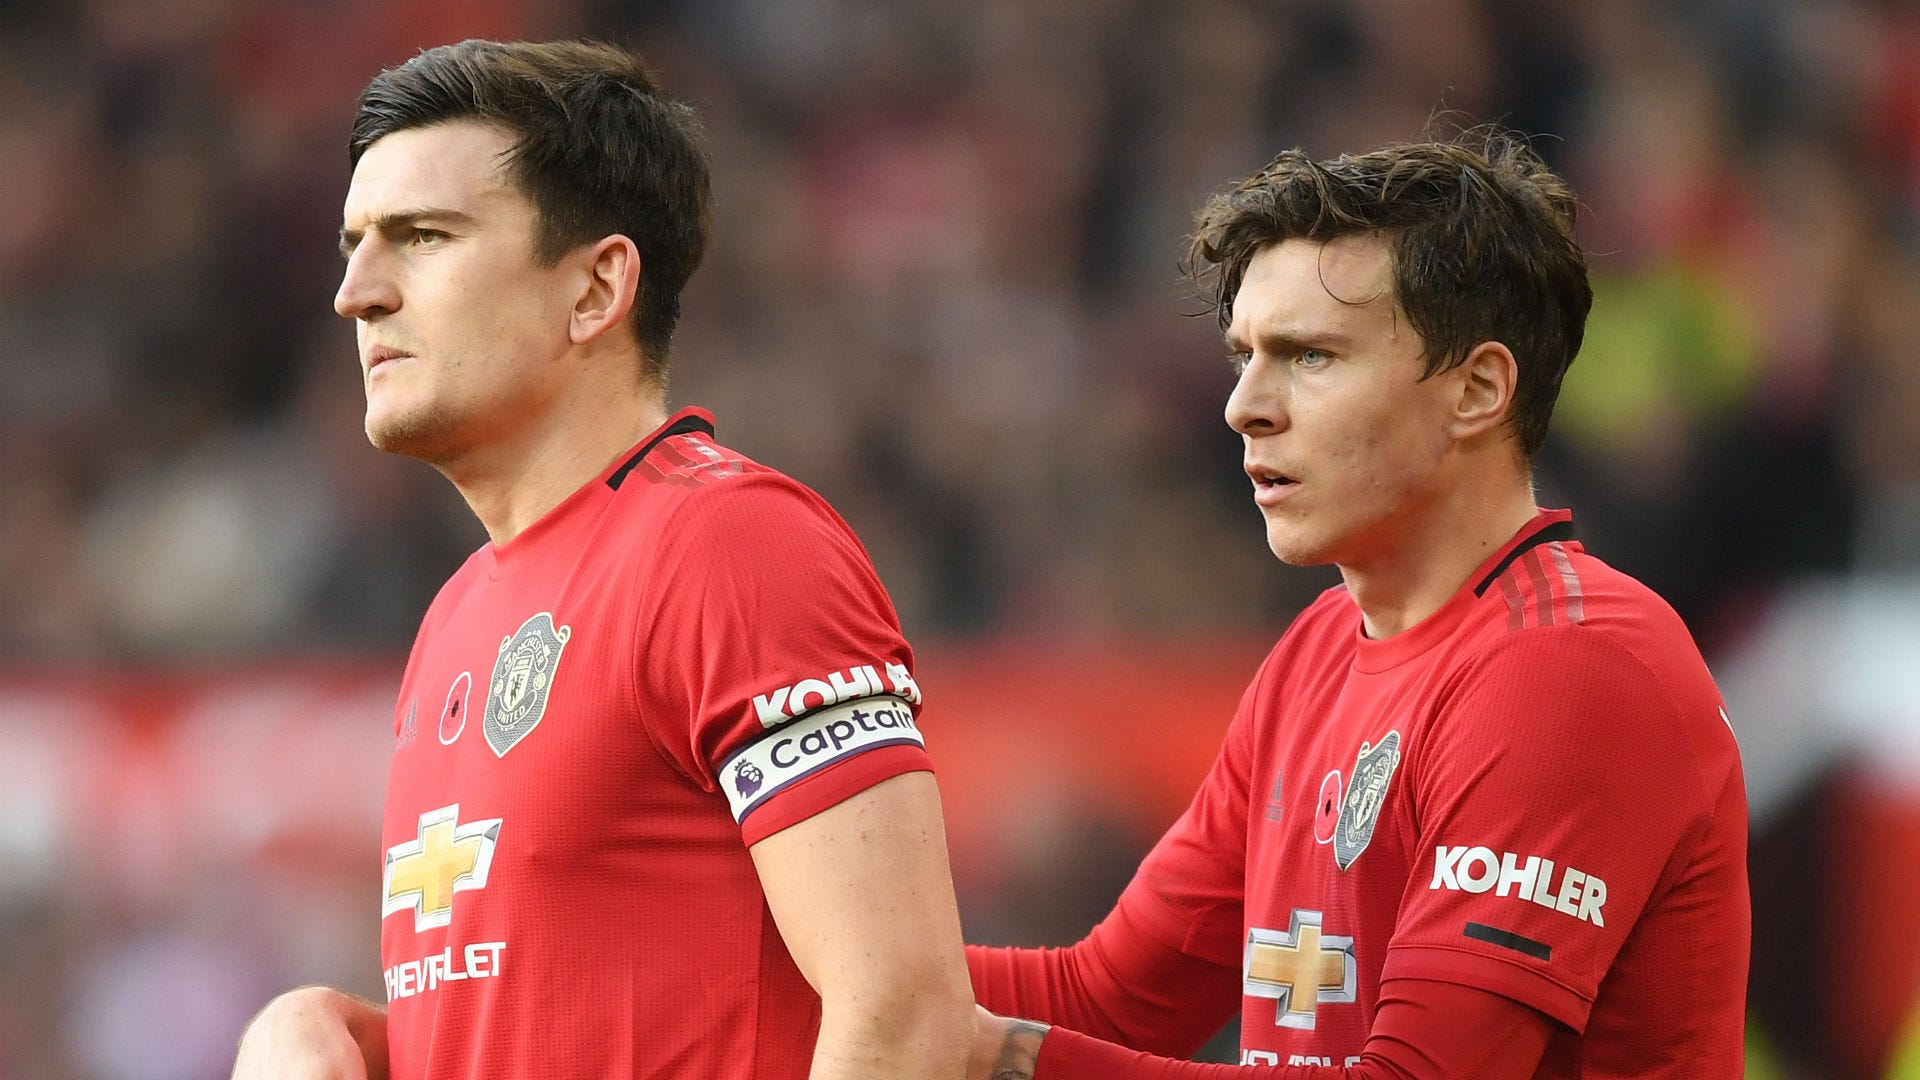 Harry Maguire Victor Lindelof Manchester United 2019-20